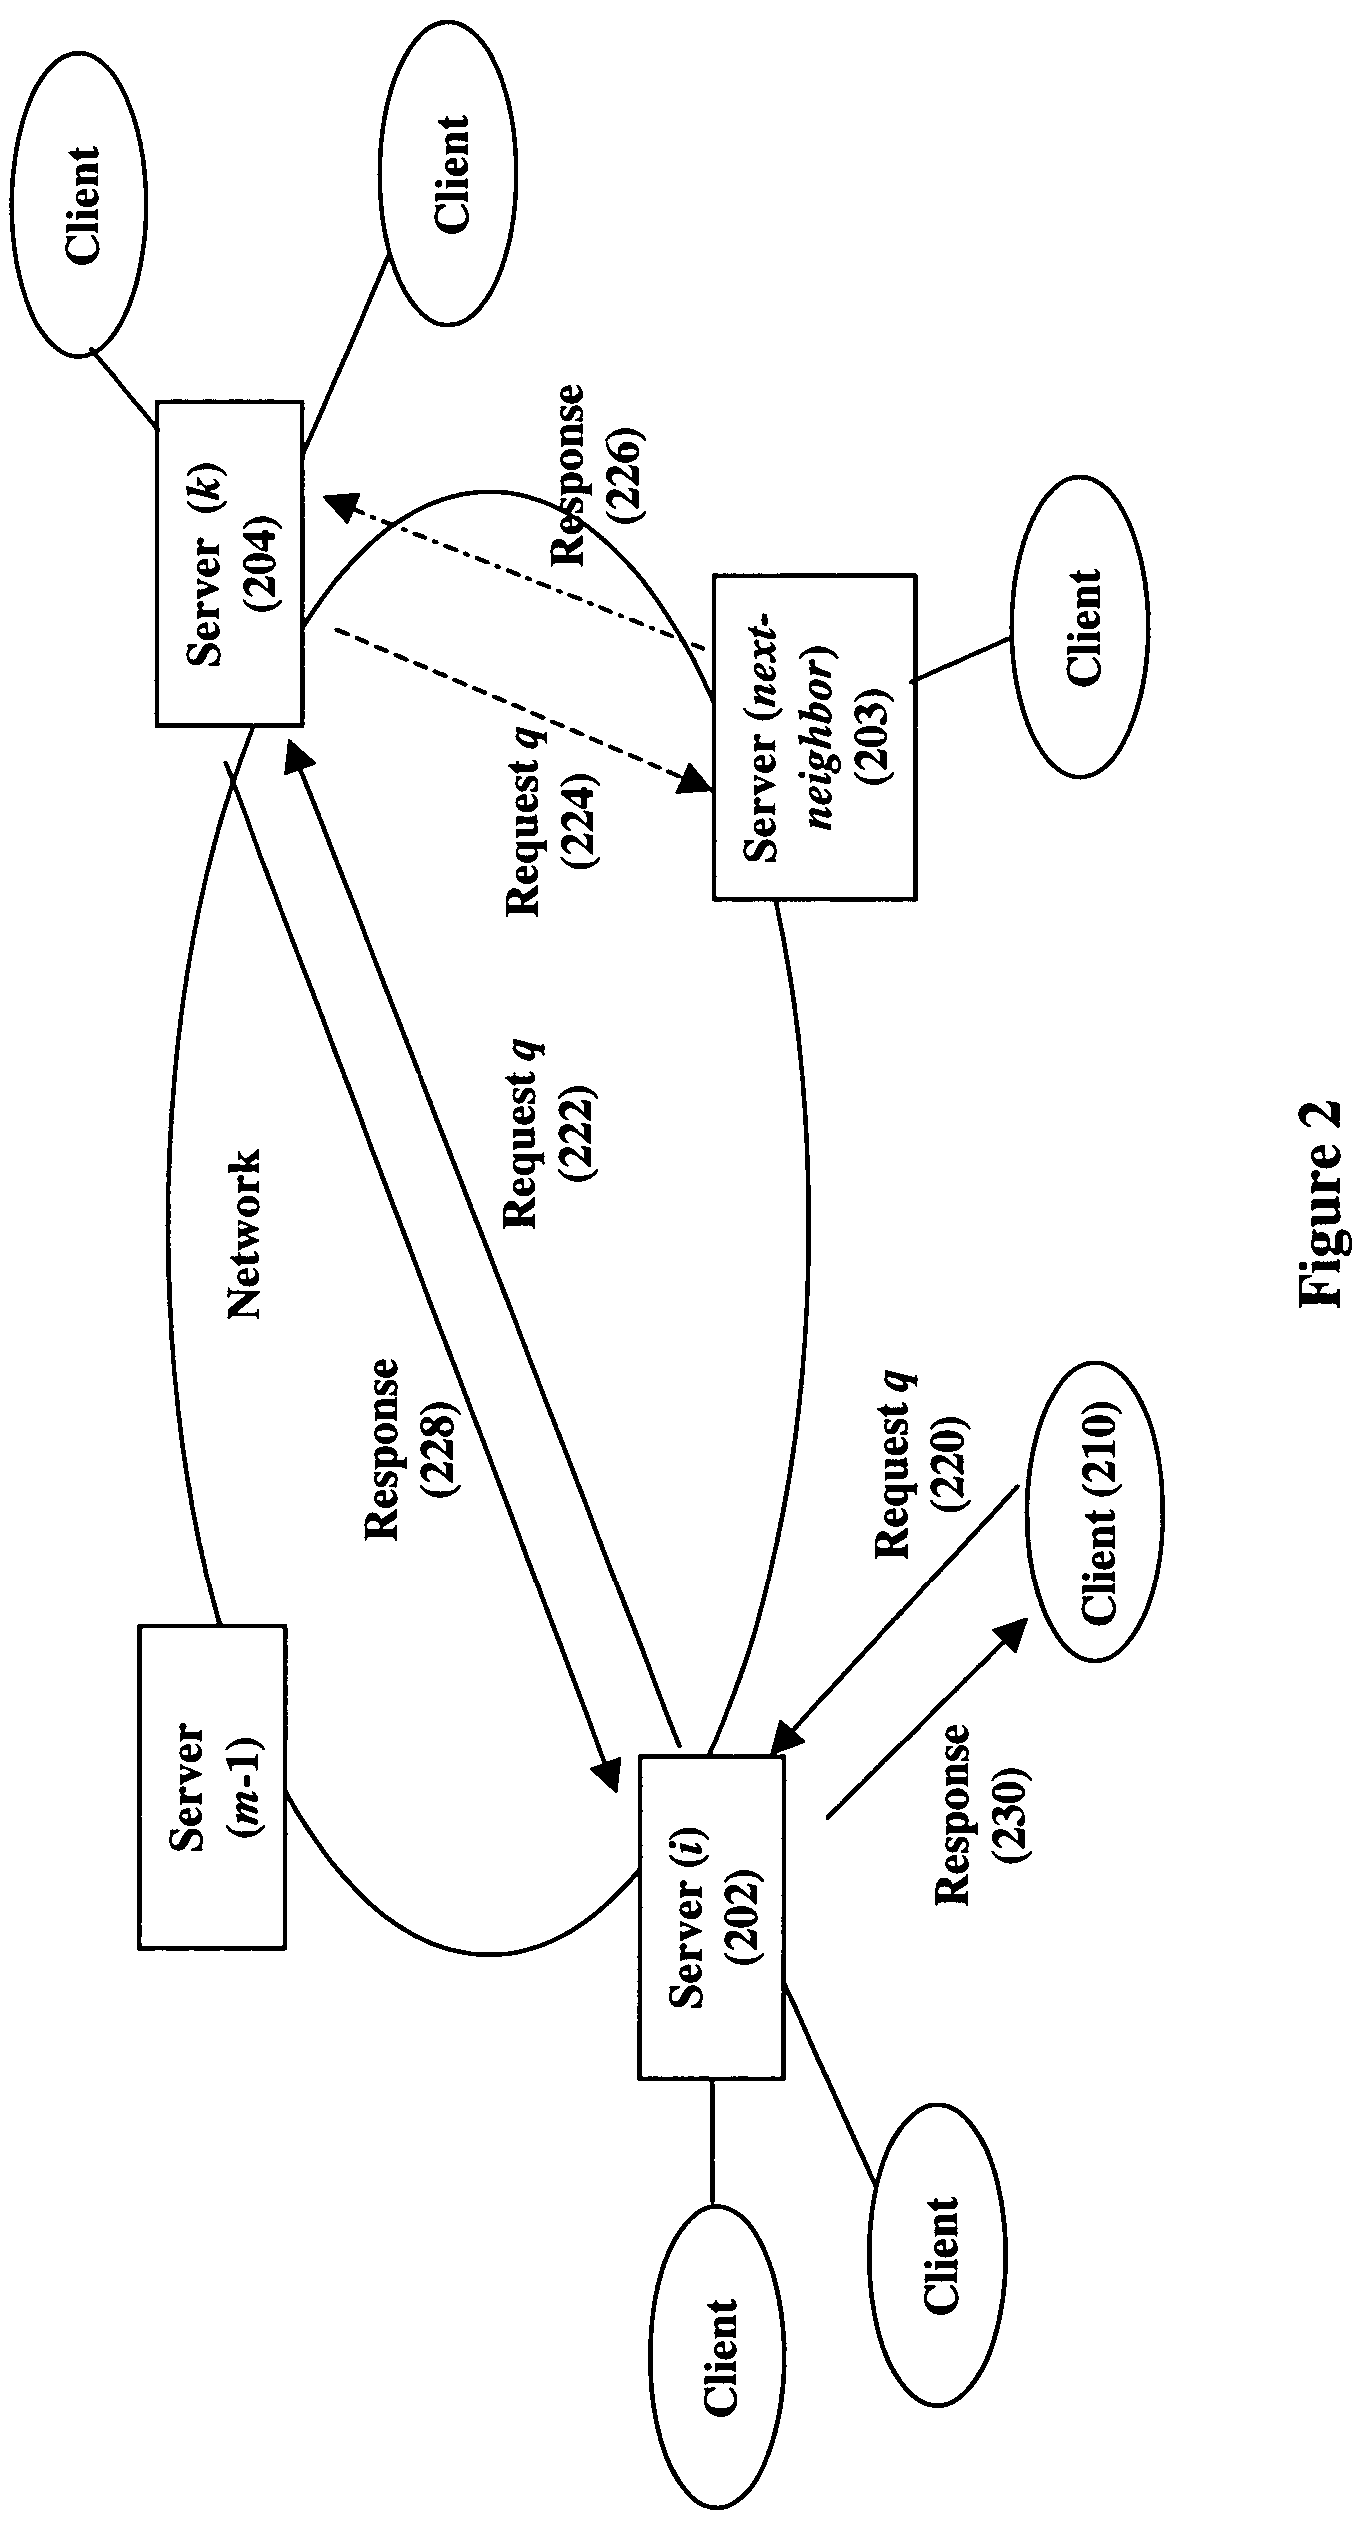 Distributed request routing